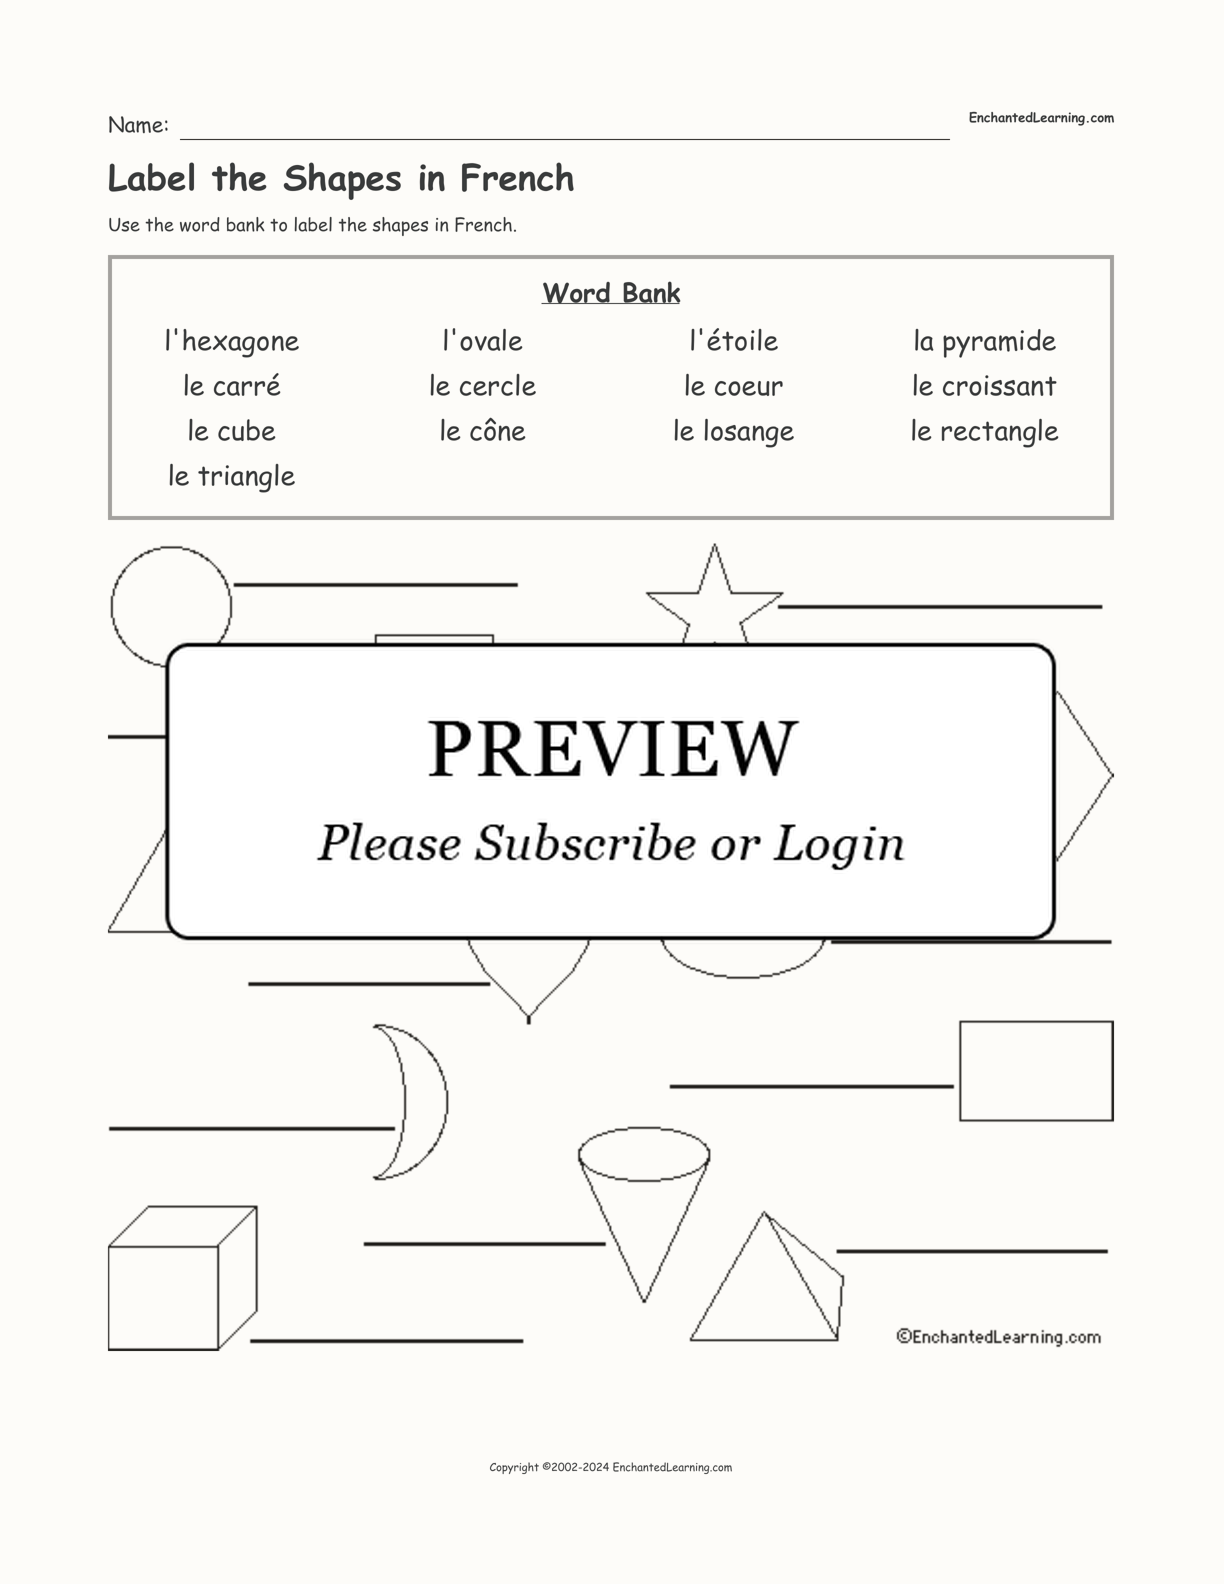 Label the Shapes in French interactive worksheet page 1